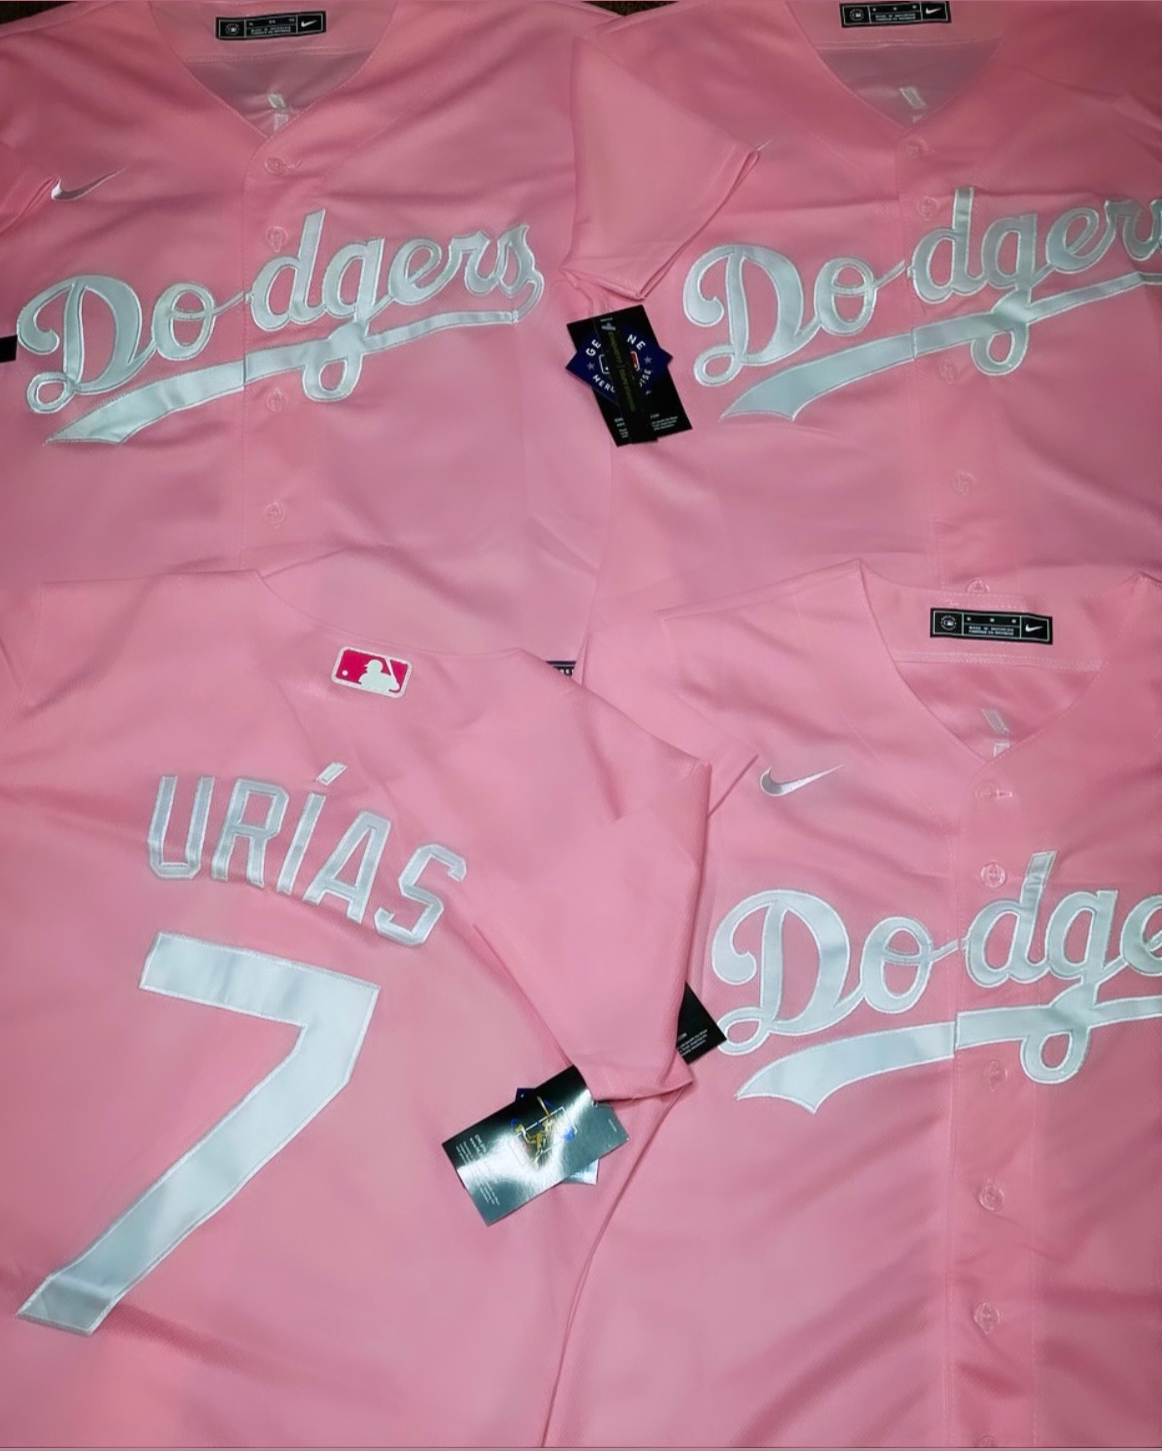 Tops  Womens Dodgers Mexico Edition Urias 7 Jersey Available Size